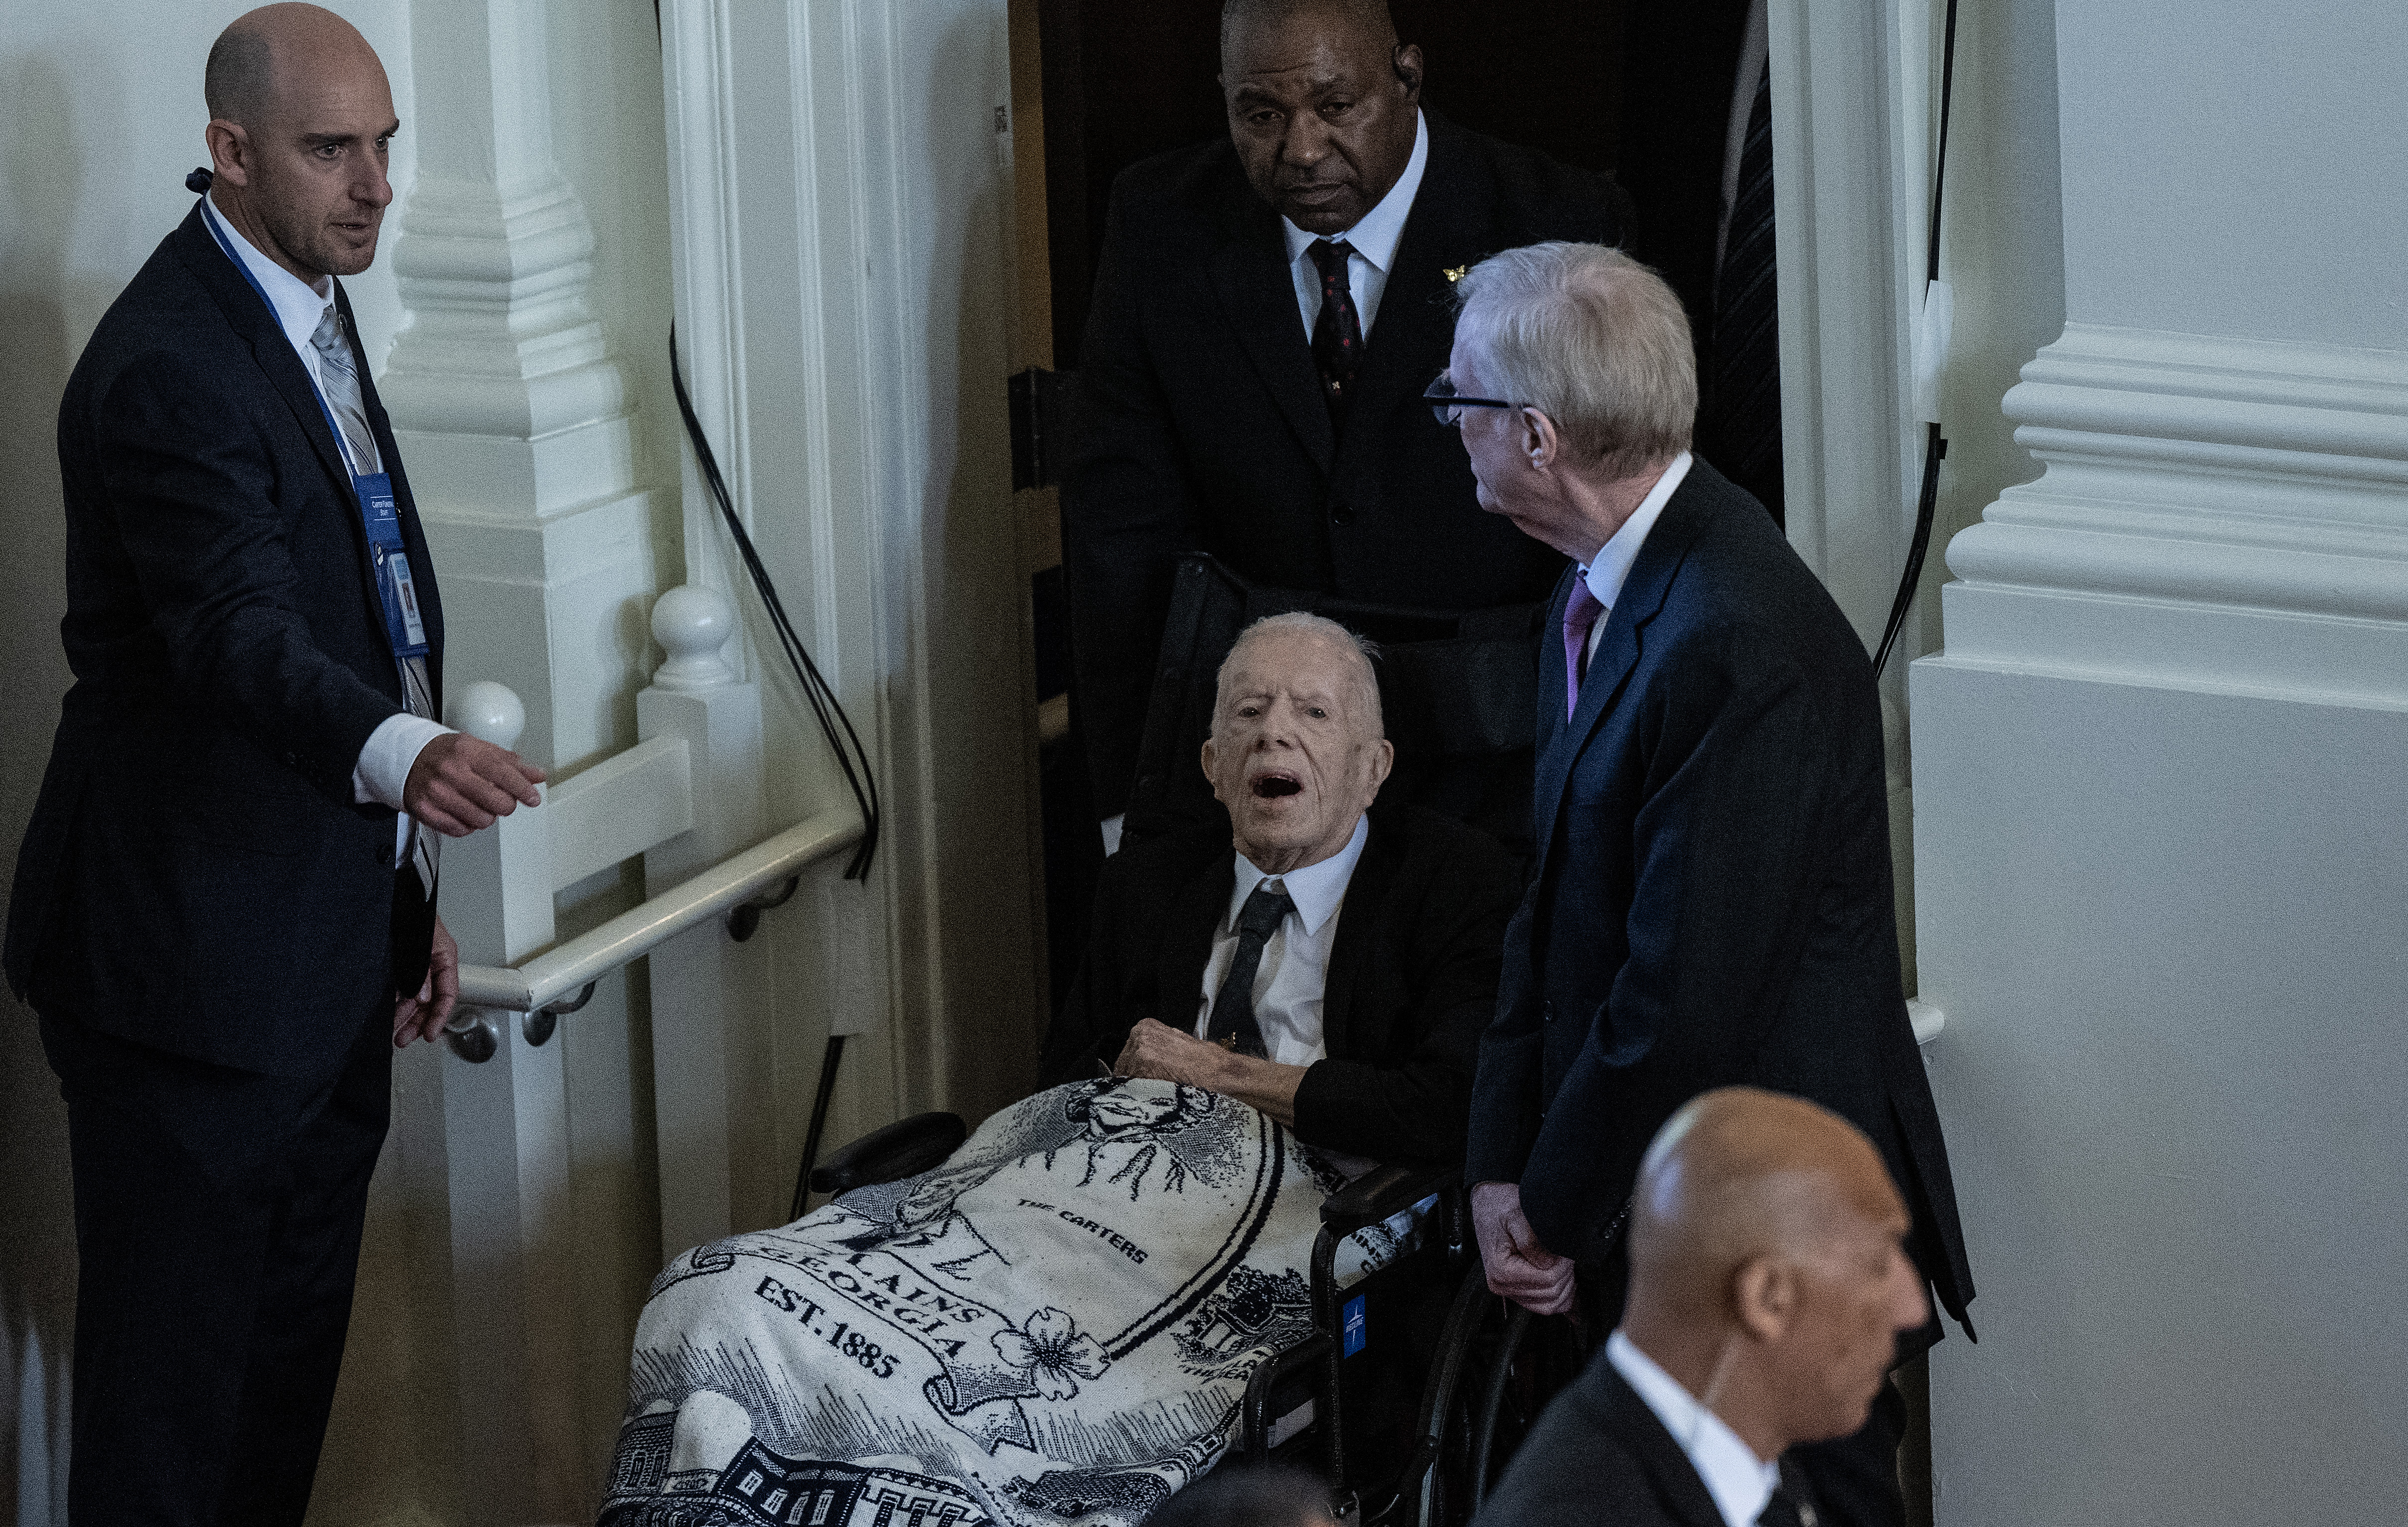 Former U.S. President Jimmy Carter arriving at his late wife's memorial service in Atlanta, Georgia on November 28, 2023 | Source: Getty Images